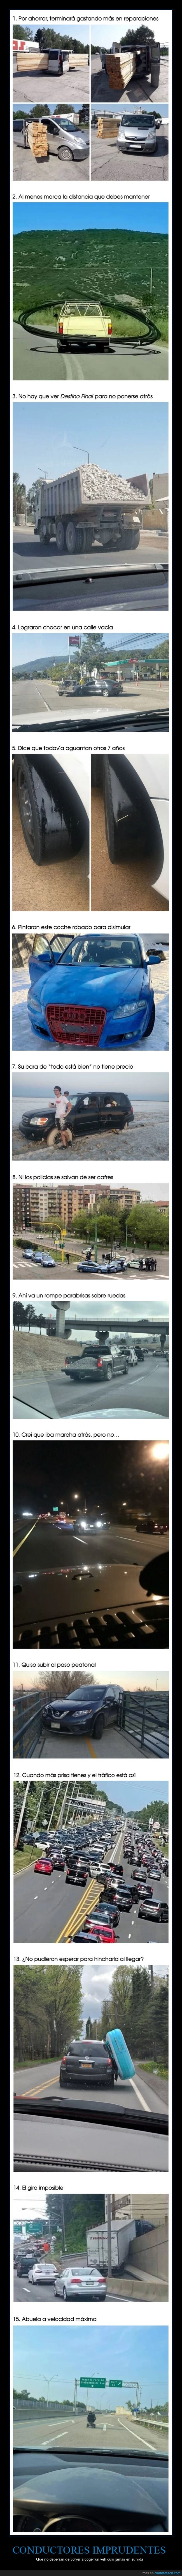 conductores,coches,fails